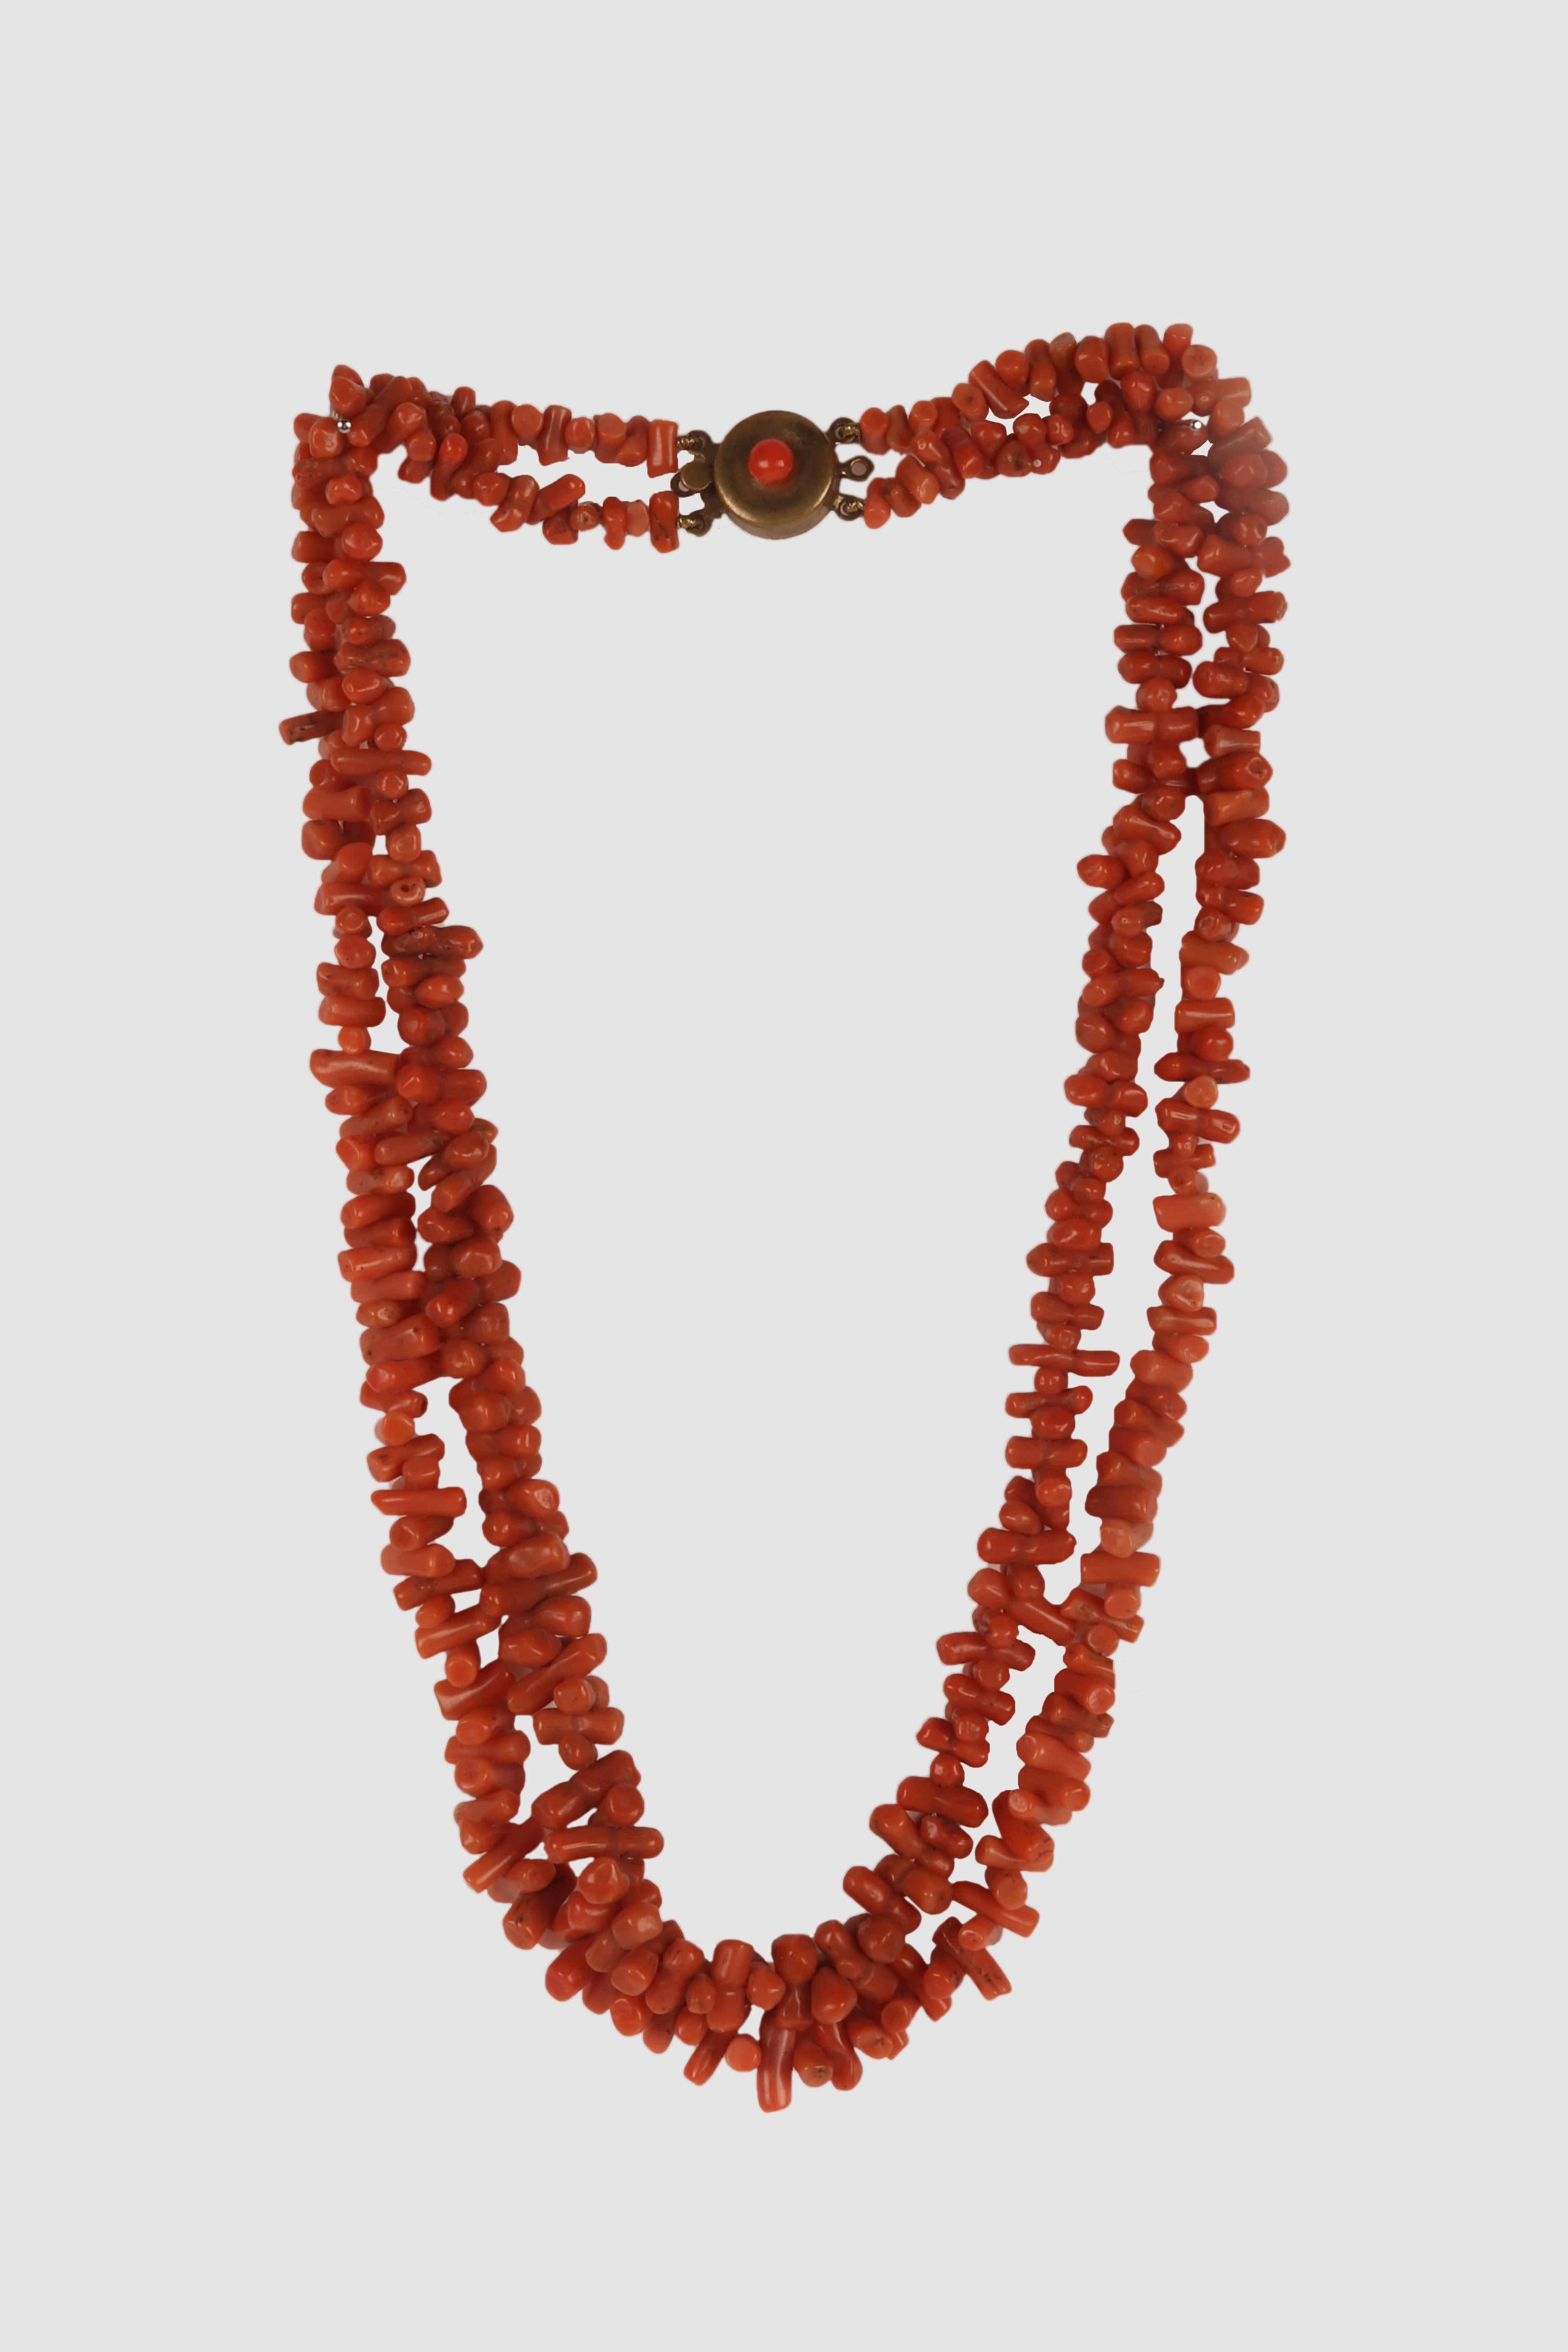 The necklace features a double strand of rod-shaped Sciacca coral elements juxtaposed at right angles in the threading. The round clasp is made of golden metal and features a central Sciacca coral button. Two further lateral hooks probably held a